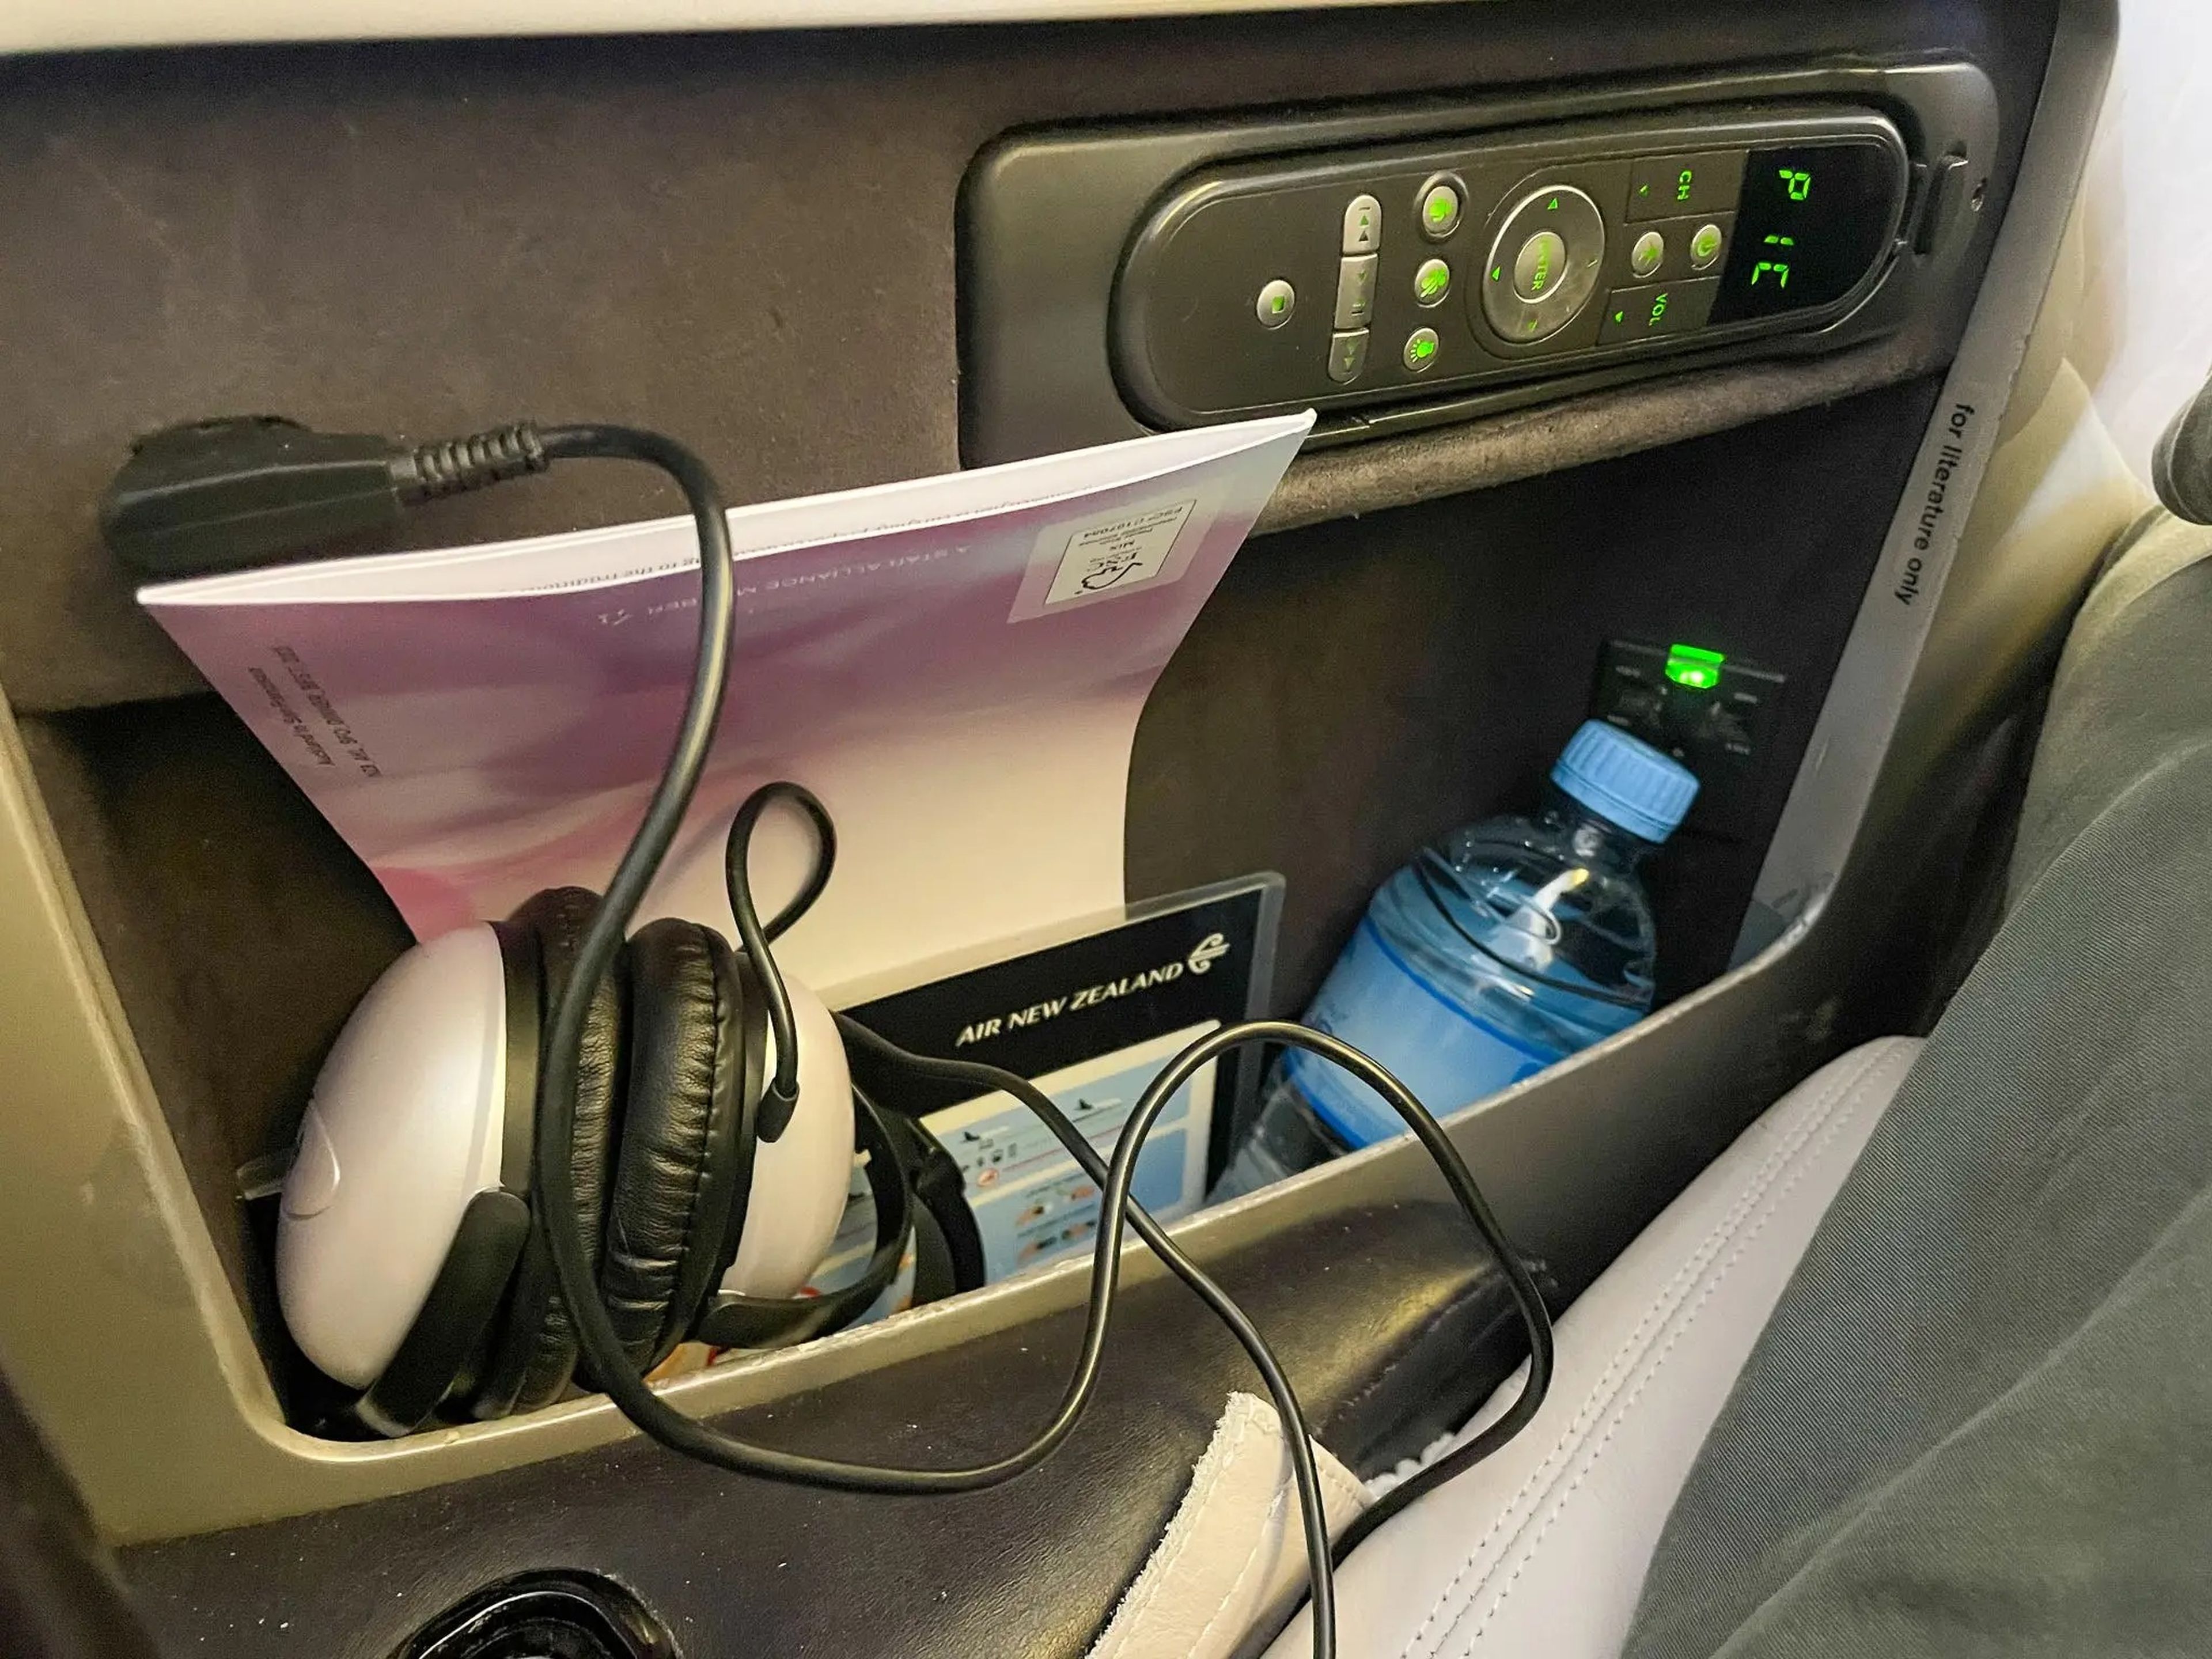 Air New Zealand business-class passengers are given a pair of over-the-ear, corded headphones.